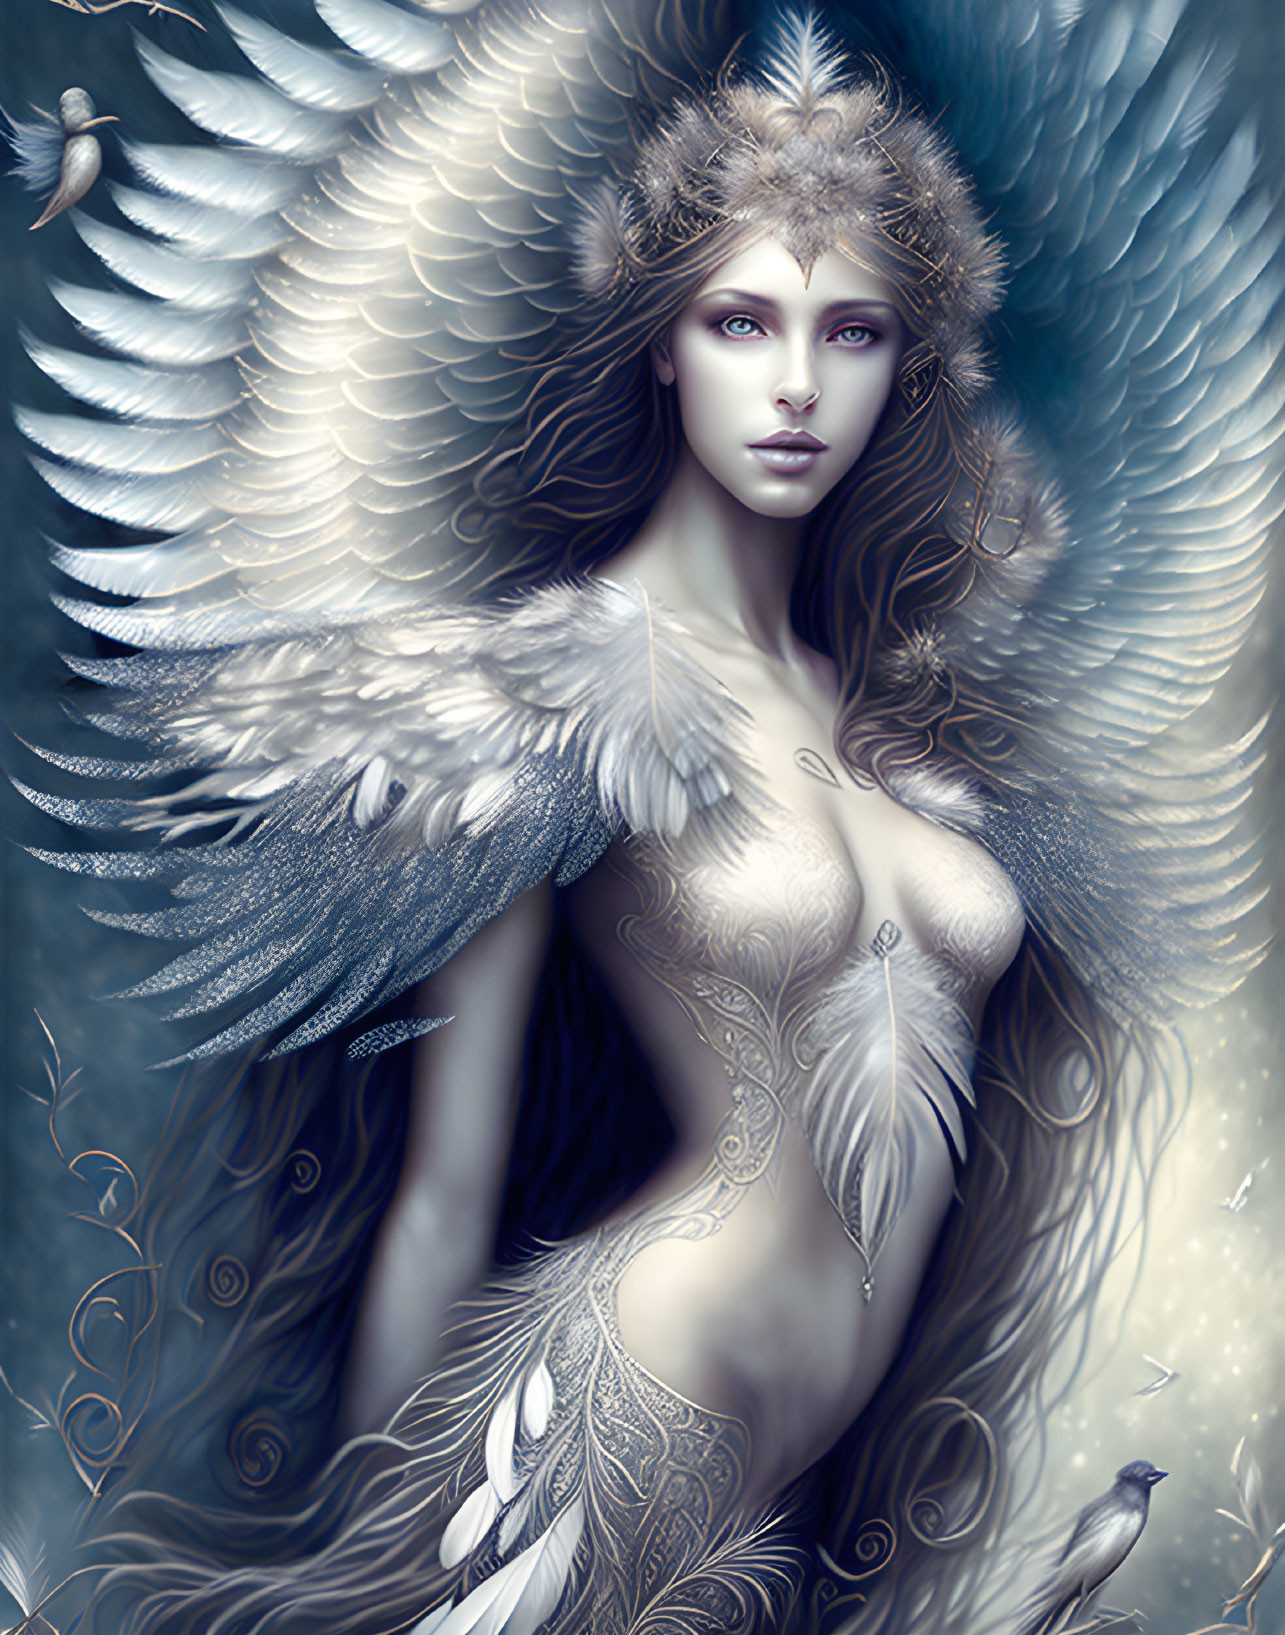 Fantasy illustration: Woman with feathery wings, ornate patterns, mystical light, birds